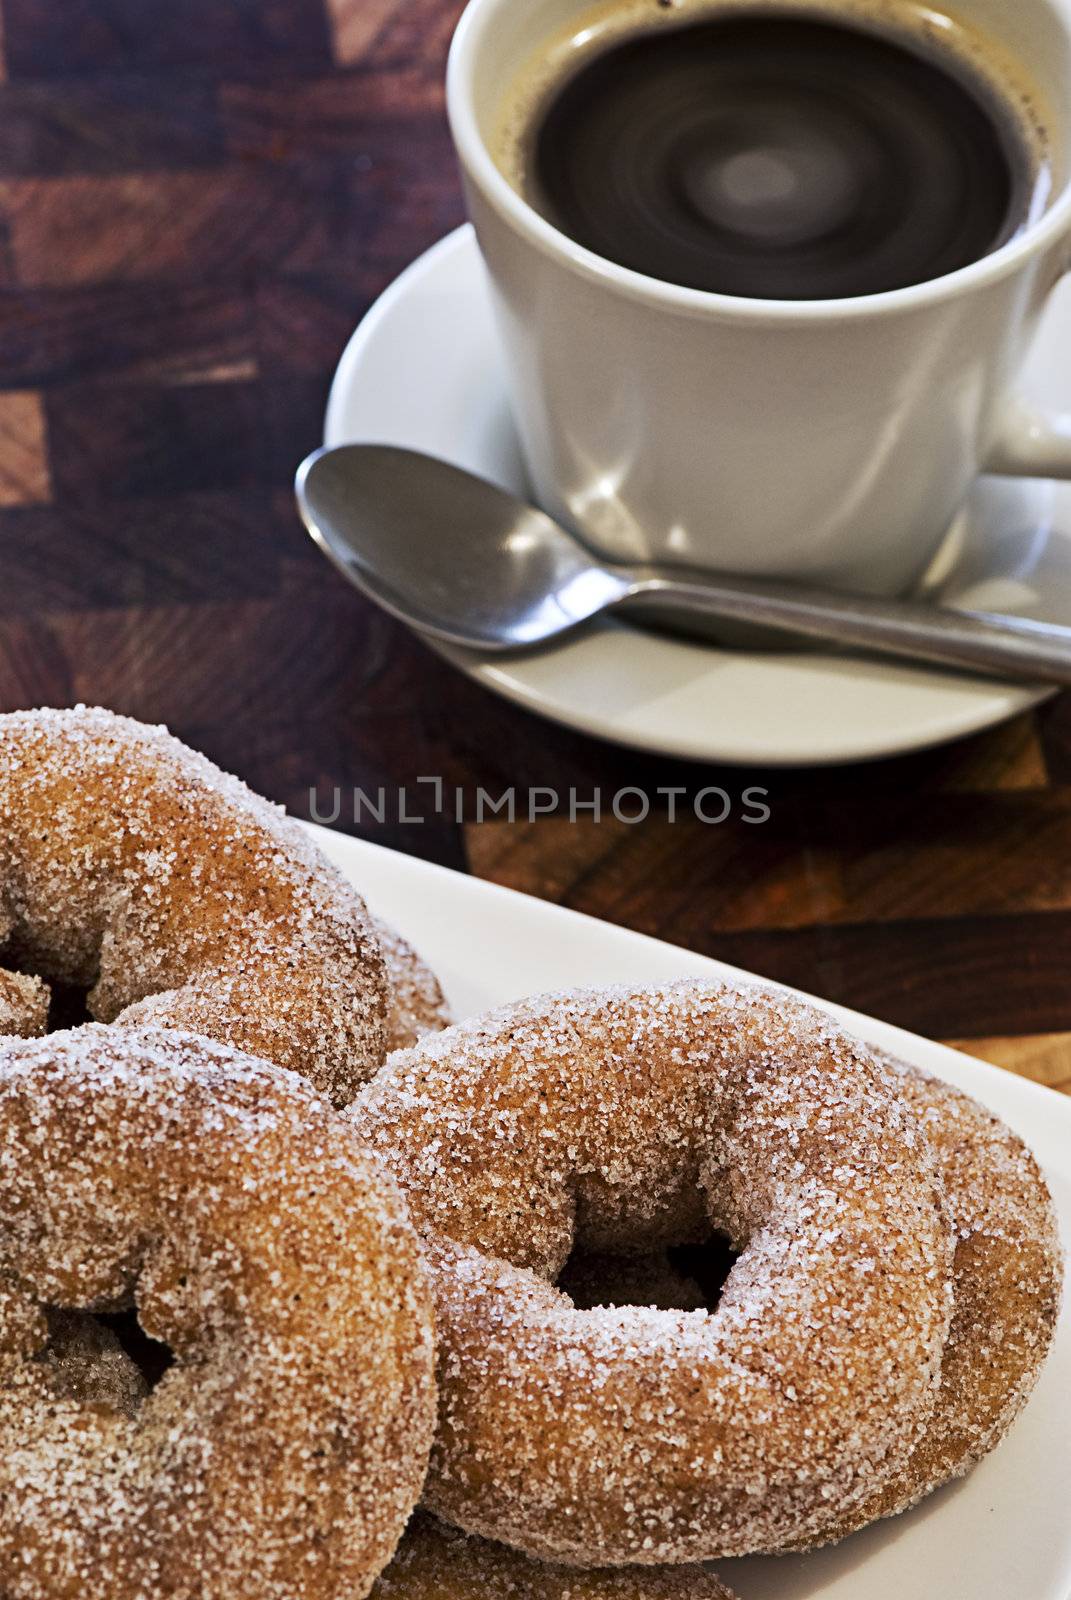 A plate piled high with donuts in front of a hot cup of coffee.